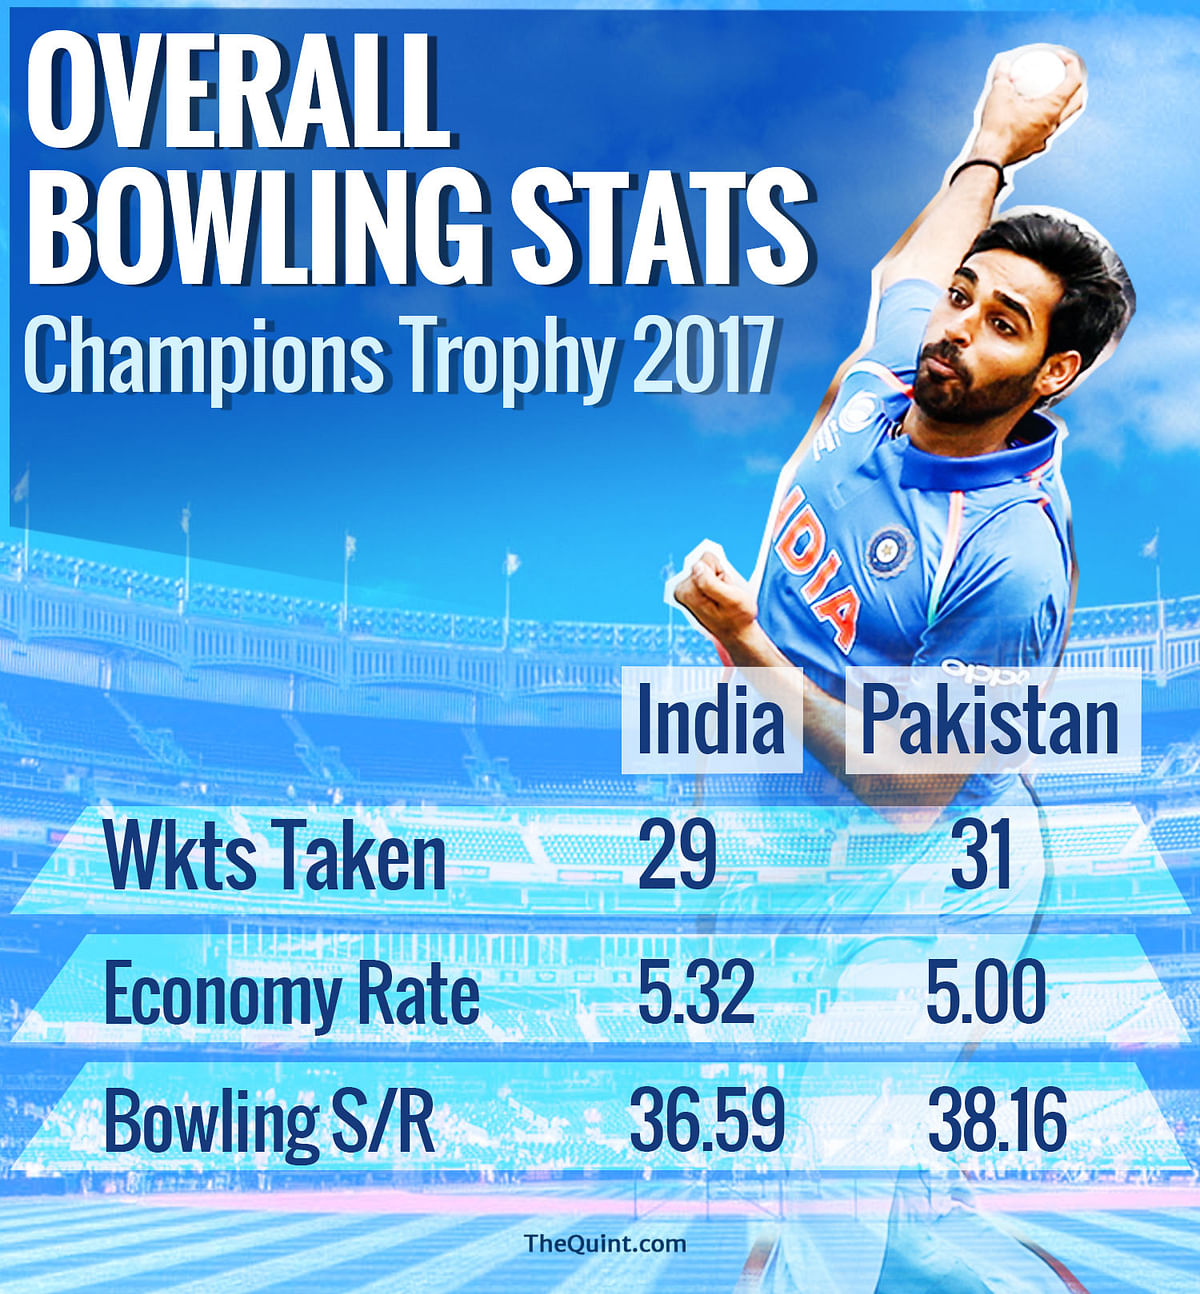 Statistician Arun Gopalakrishnan previews the Champions Trophy final between India and Pakistan through numbers.